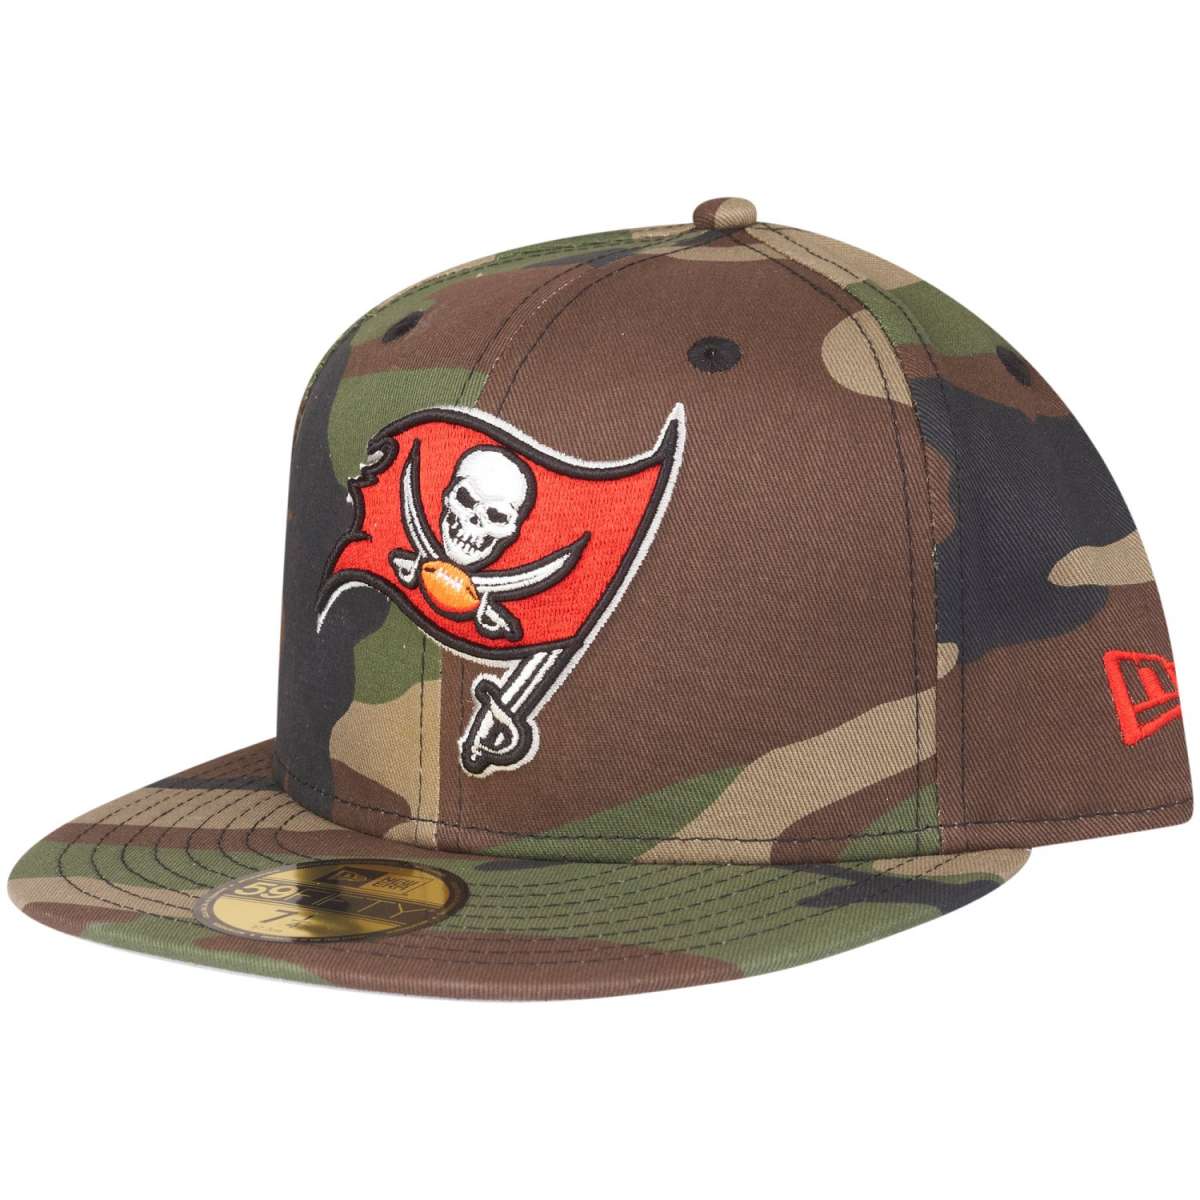 New Era 59Fifty Cap - Tampa Bay Buccaneers wood camo | Fitted | Caps ...